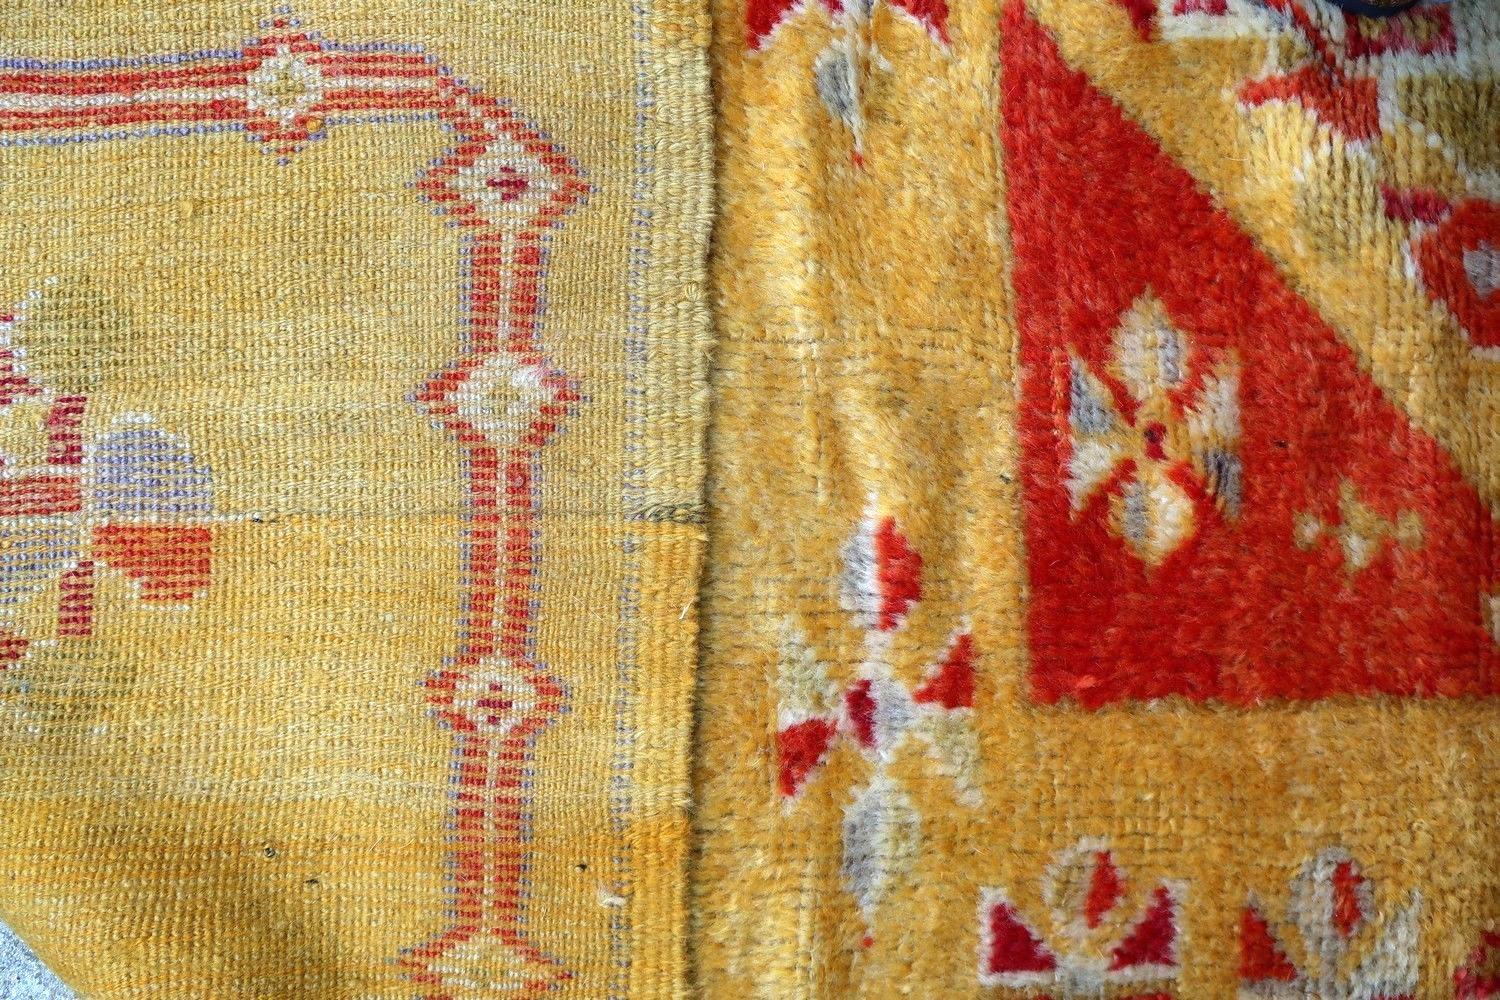 Antique handmade Moroccan rug in original good condition and yellow color. The rug id from the beginning of 20th century made in wool.

-condition: original good,

-circa: 1920s,

-size: 4.4' x 7.4' (135cm x 225cm),

-material: